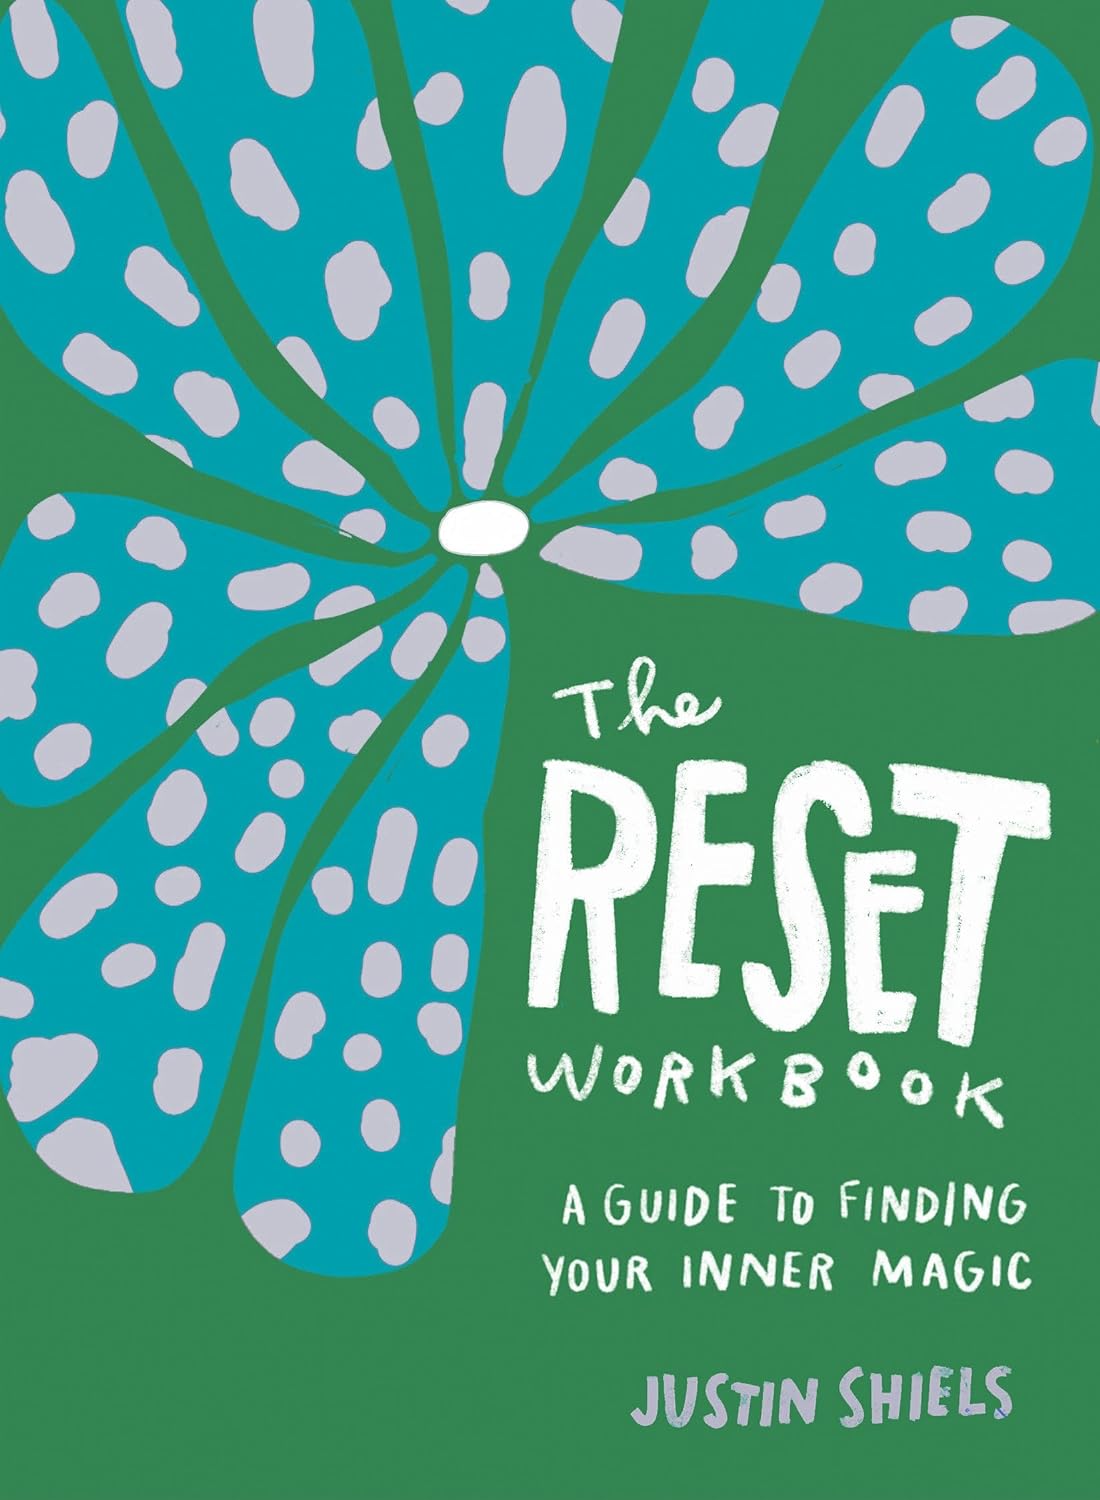 The Reset Workbook, by Justin Shiels